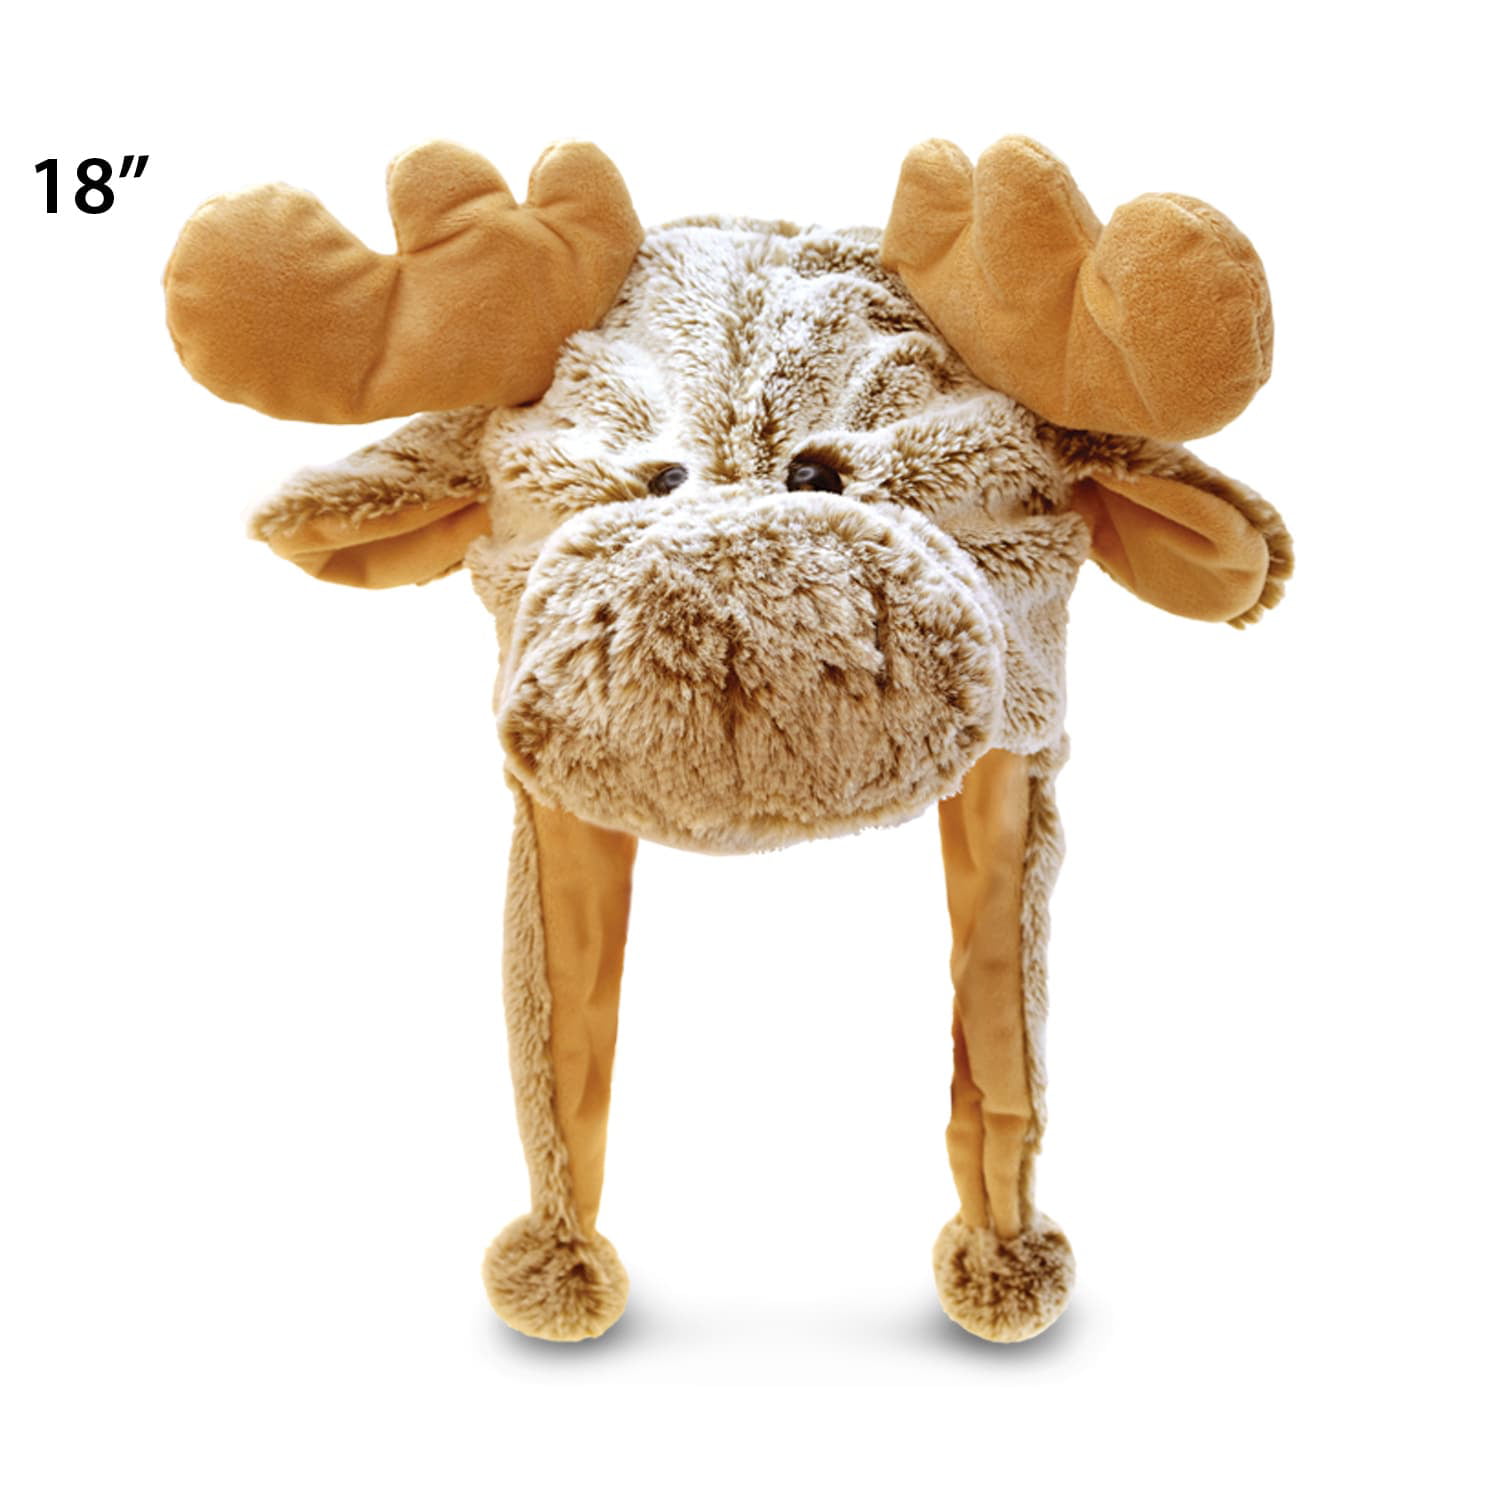 Puzzled Super-Soft Sitting Moose Plush 11 11 Getting Fit 5047